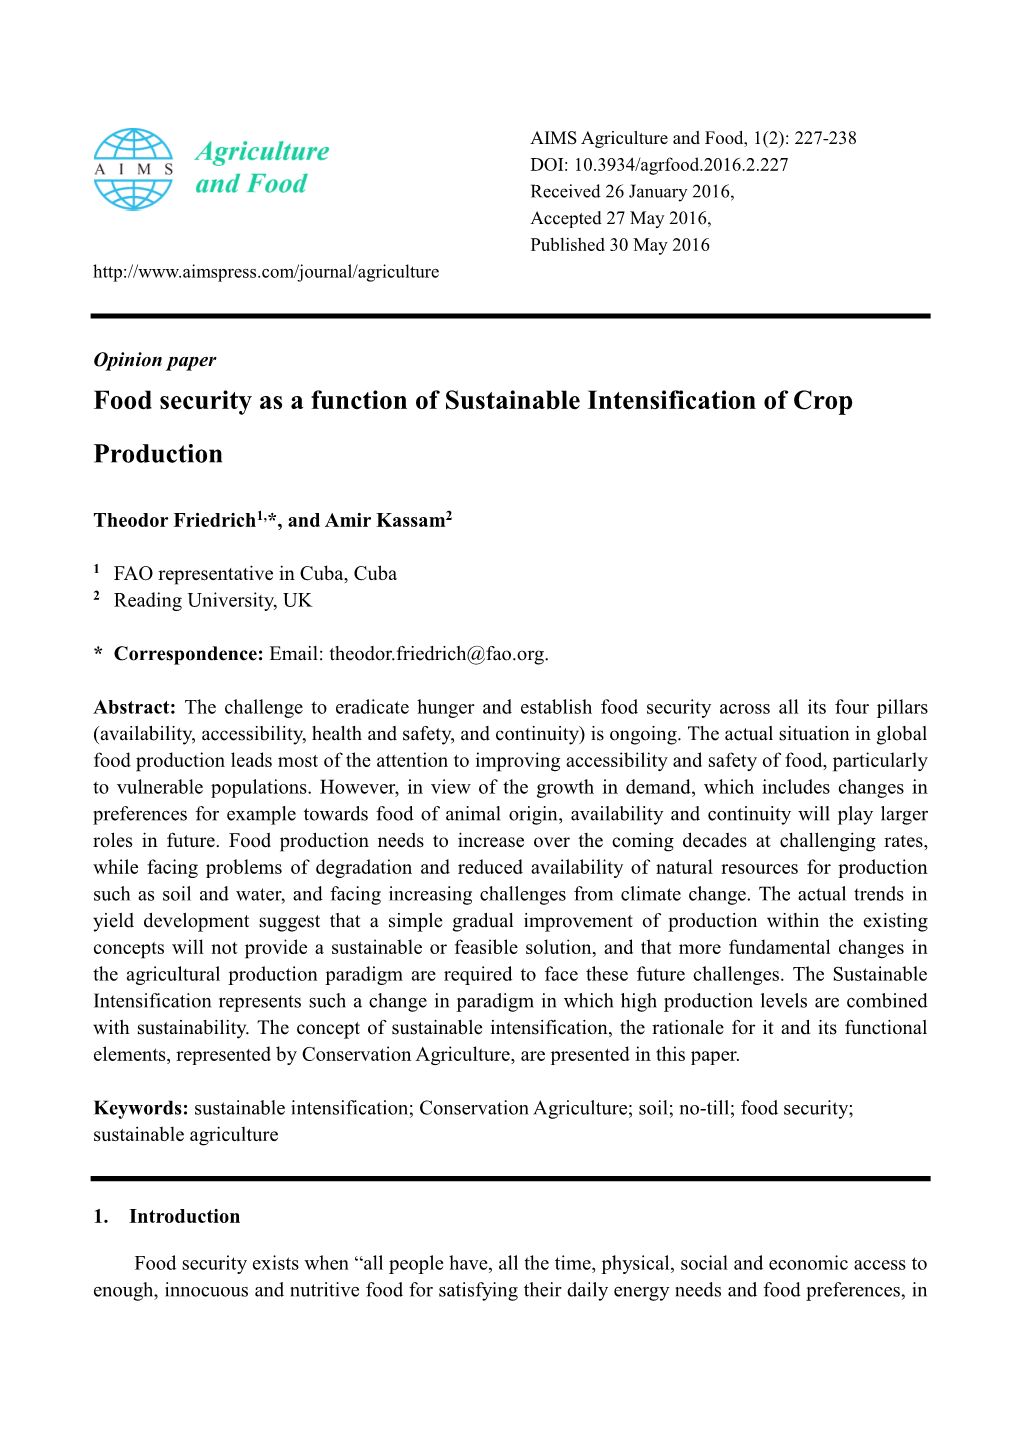 Food Security As a Function of Sustainable Intensification of Crop Production